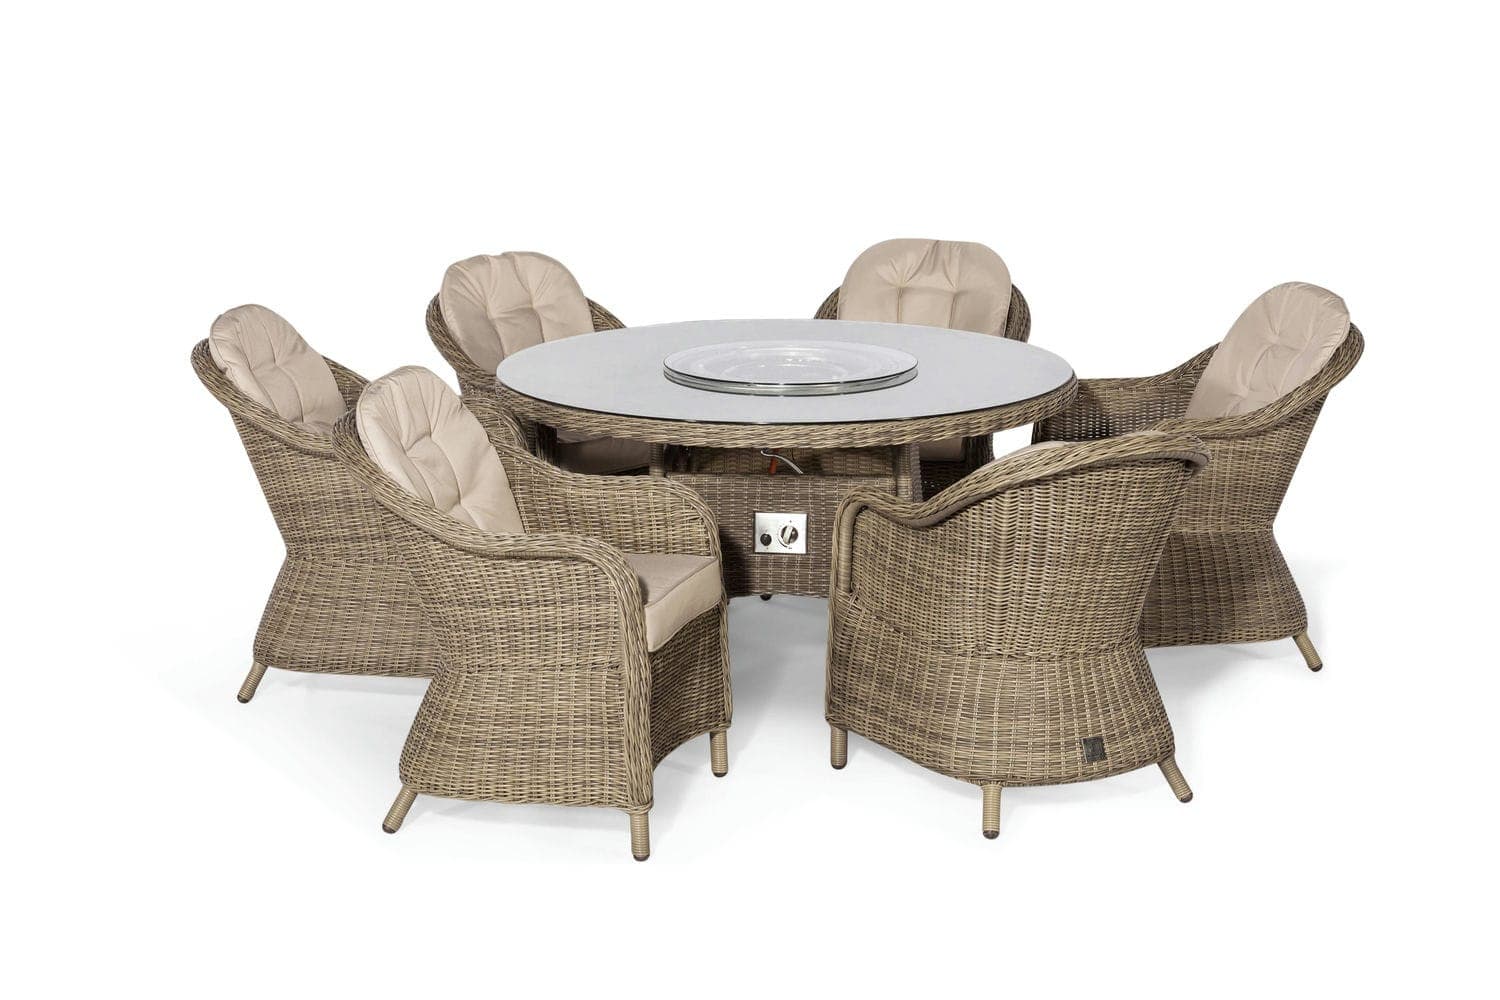 Winchester 6 Seat Round Fire Pit Dining Set with Heritage Chairs and Lazy Susan - Vookoo Lifestyle